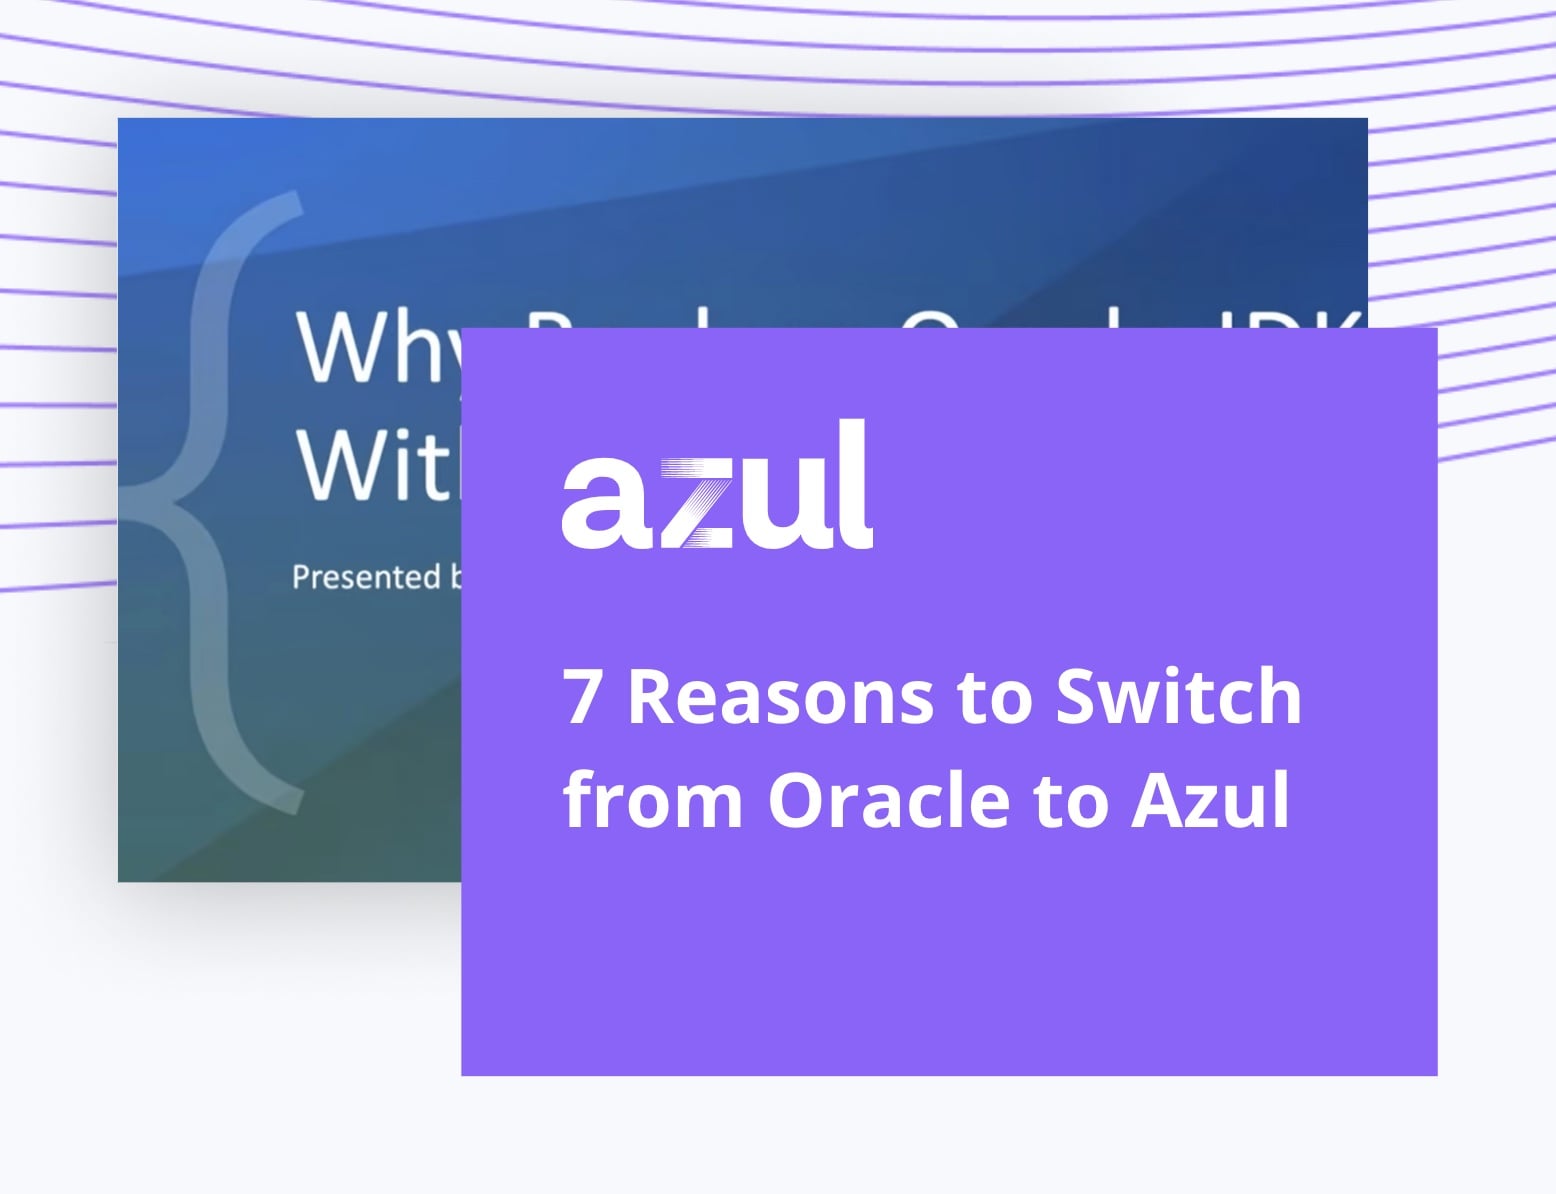 7 Reasons to Switch from Oracle to Azul